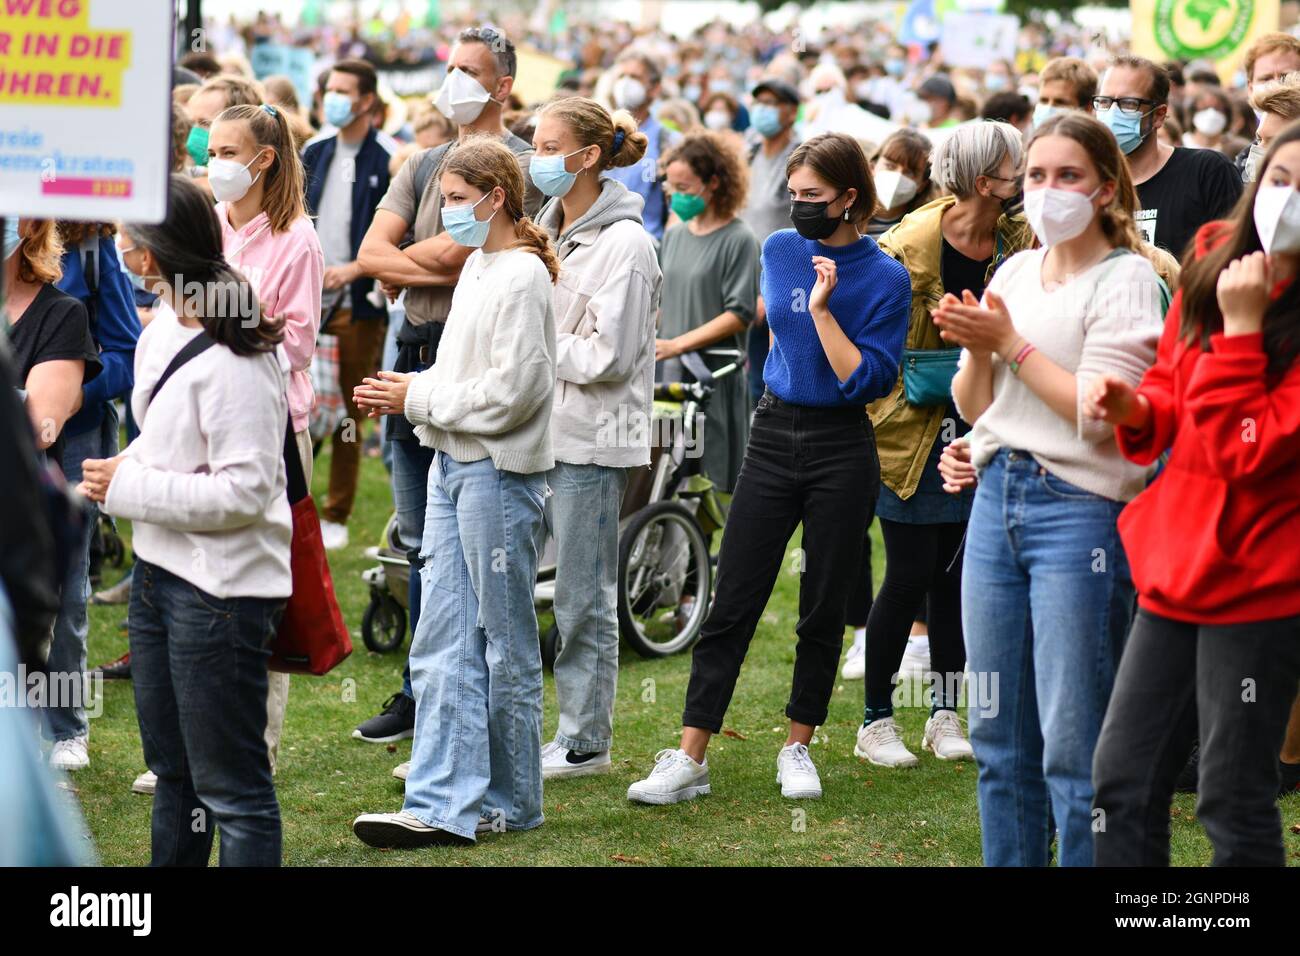 Heidelberg, Germany - 24th September 2021: Young people attending Global Climate Strike demonstration with face masks during Corona virus crisis Stock Photo